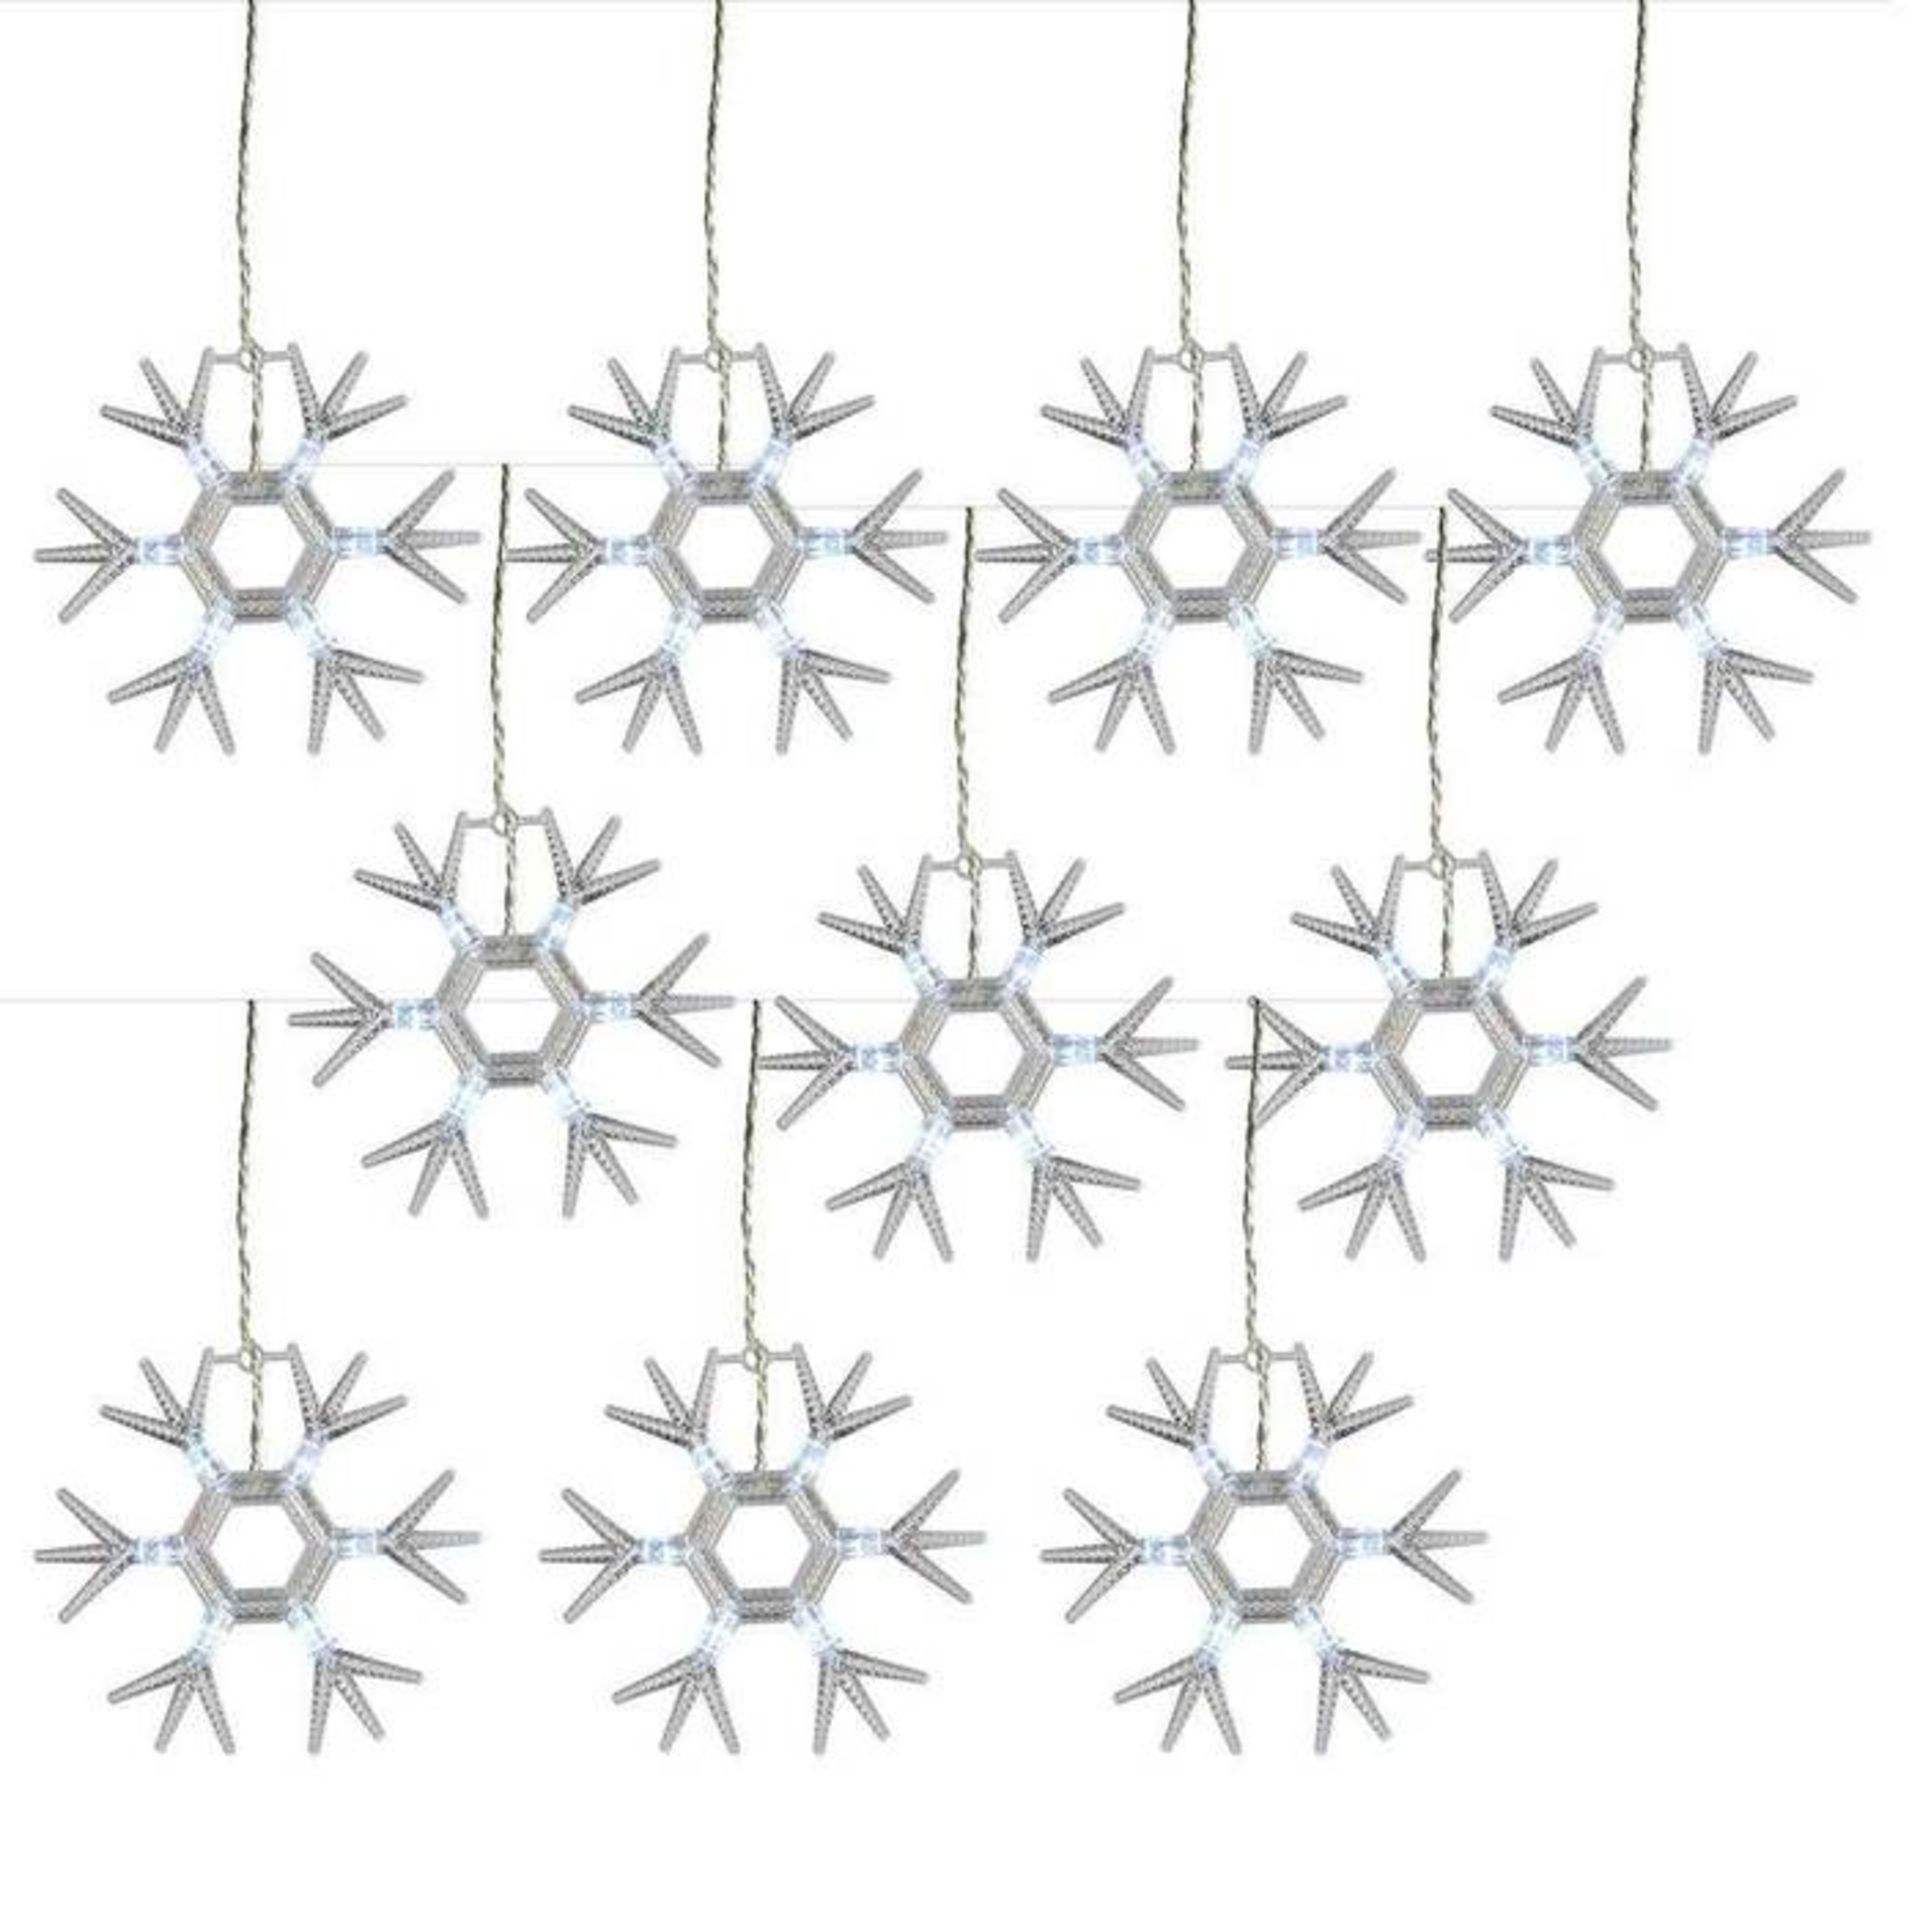 10 Acrylic Snowflakes with 60 Bright White LED Lights - Image 2 of 3